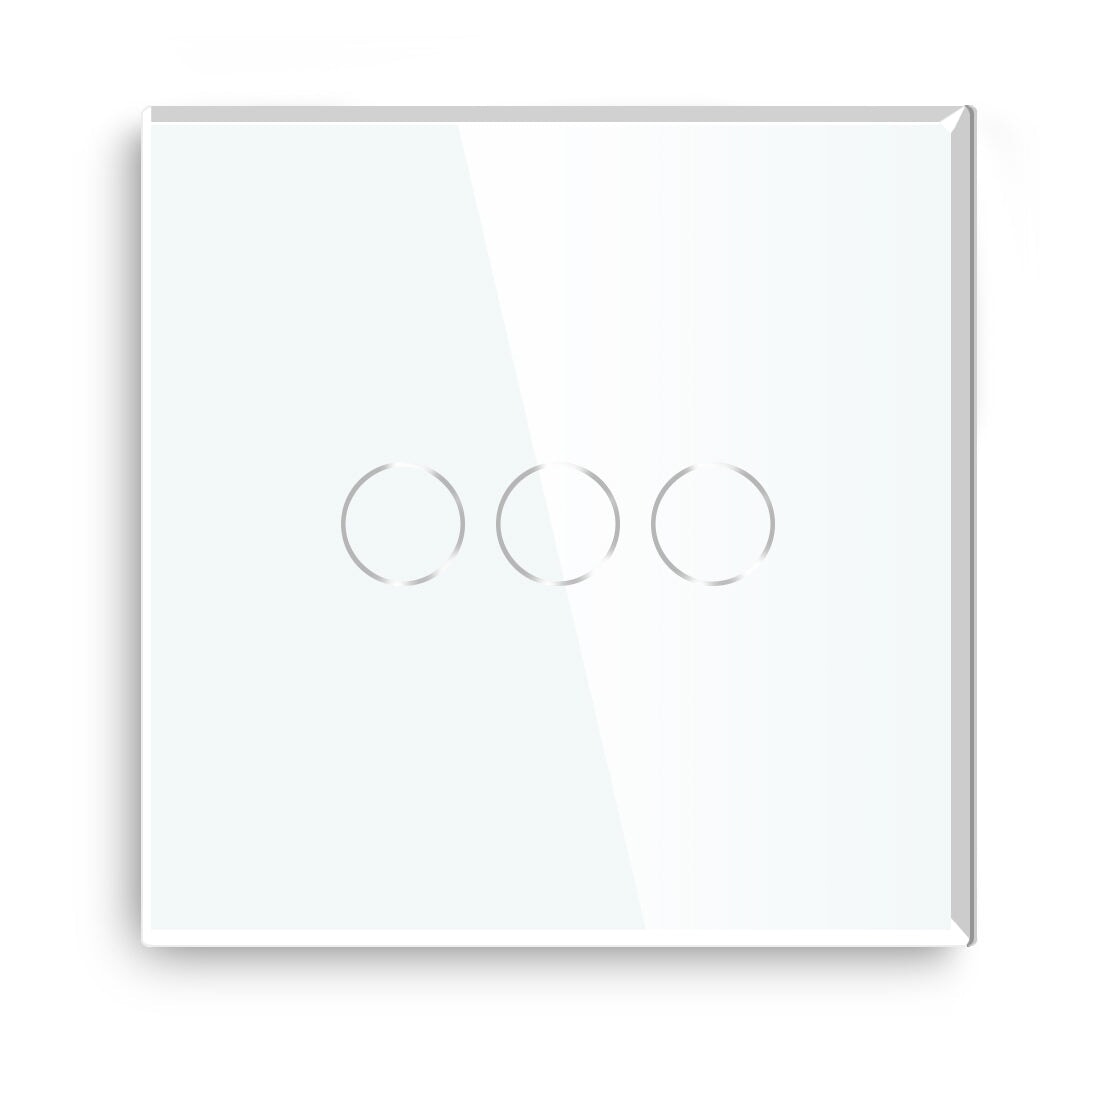 BSEED Wall Touch Screen Switches 1/2/3/4 Gang 1/2/3 Way Light Switches Bseedswitch white 3 Gang 1 way